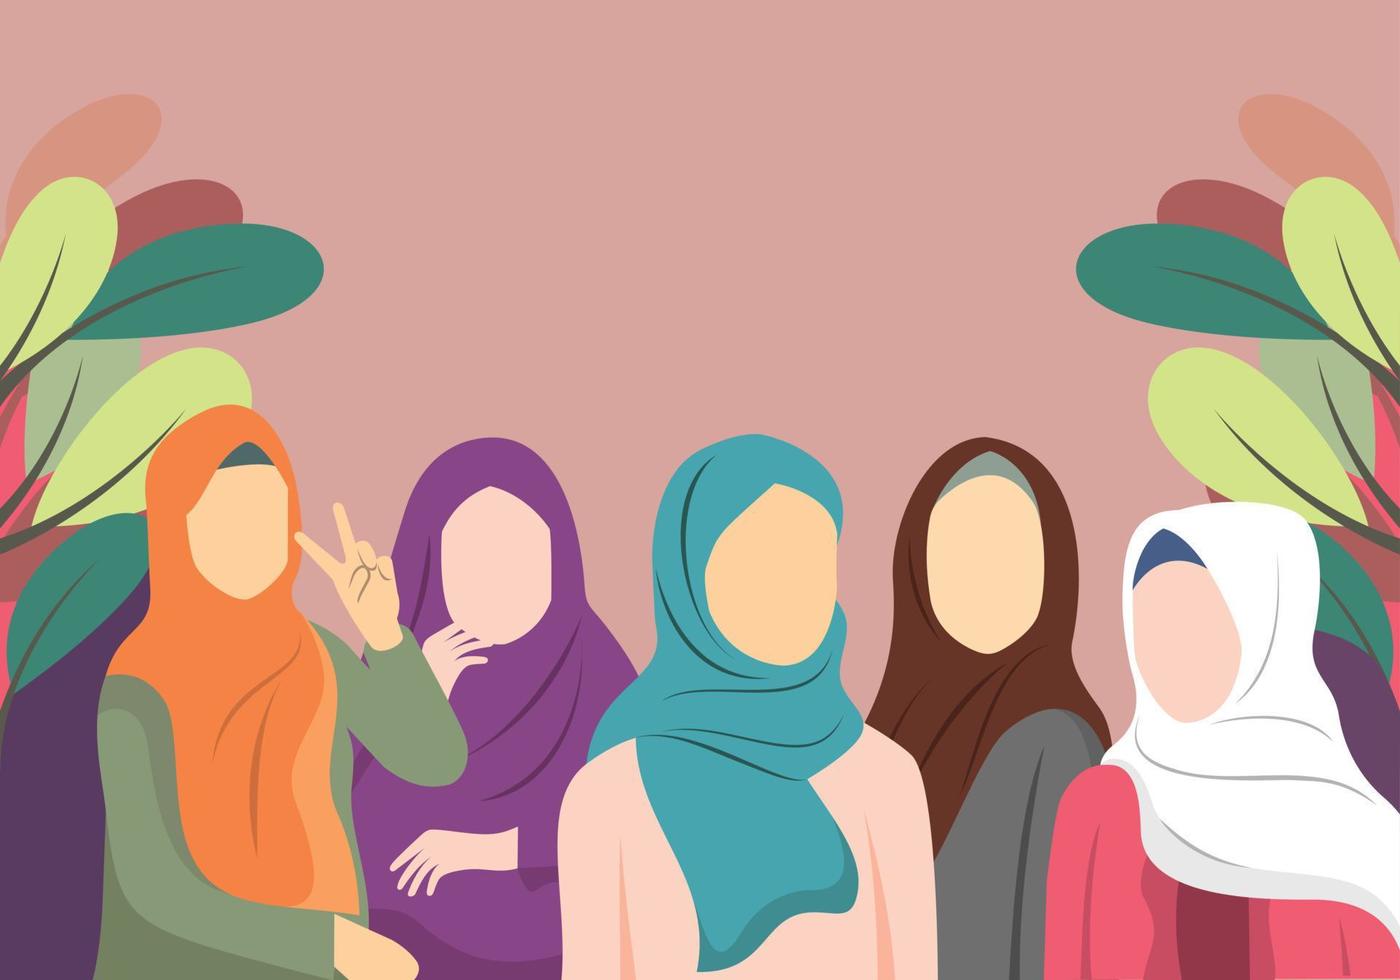 Hijab woman with friends flat design vector and illustration